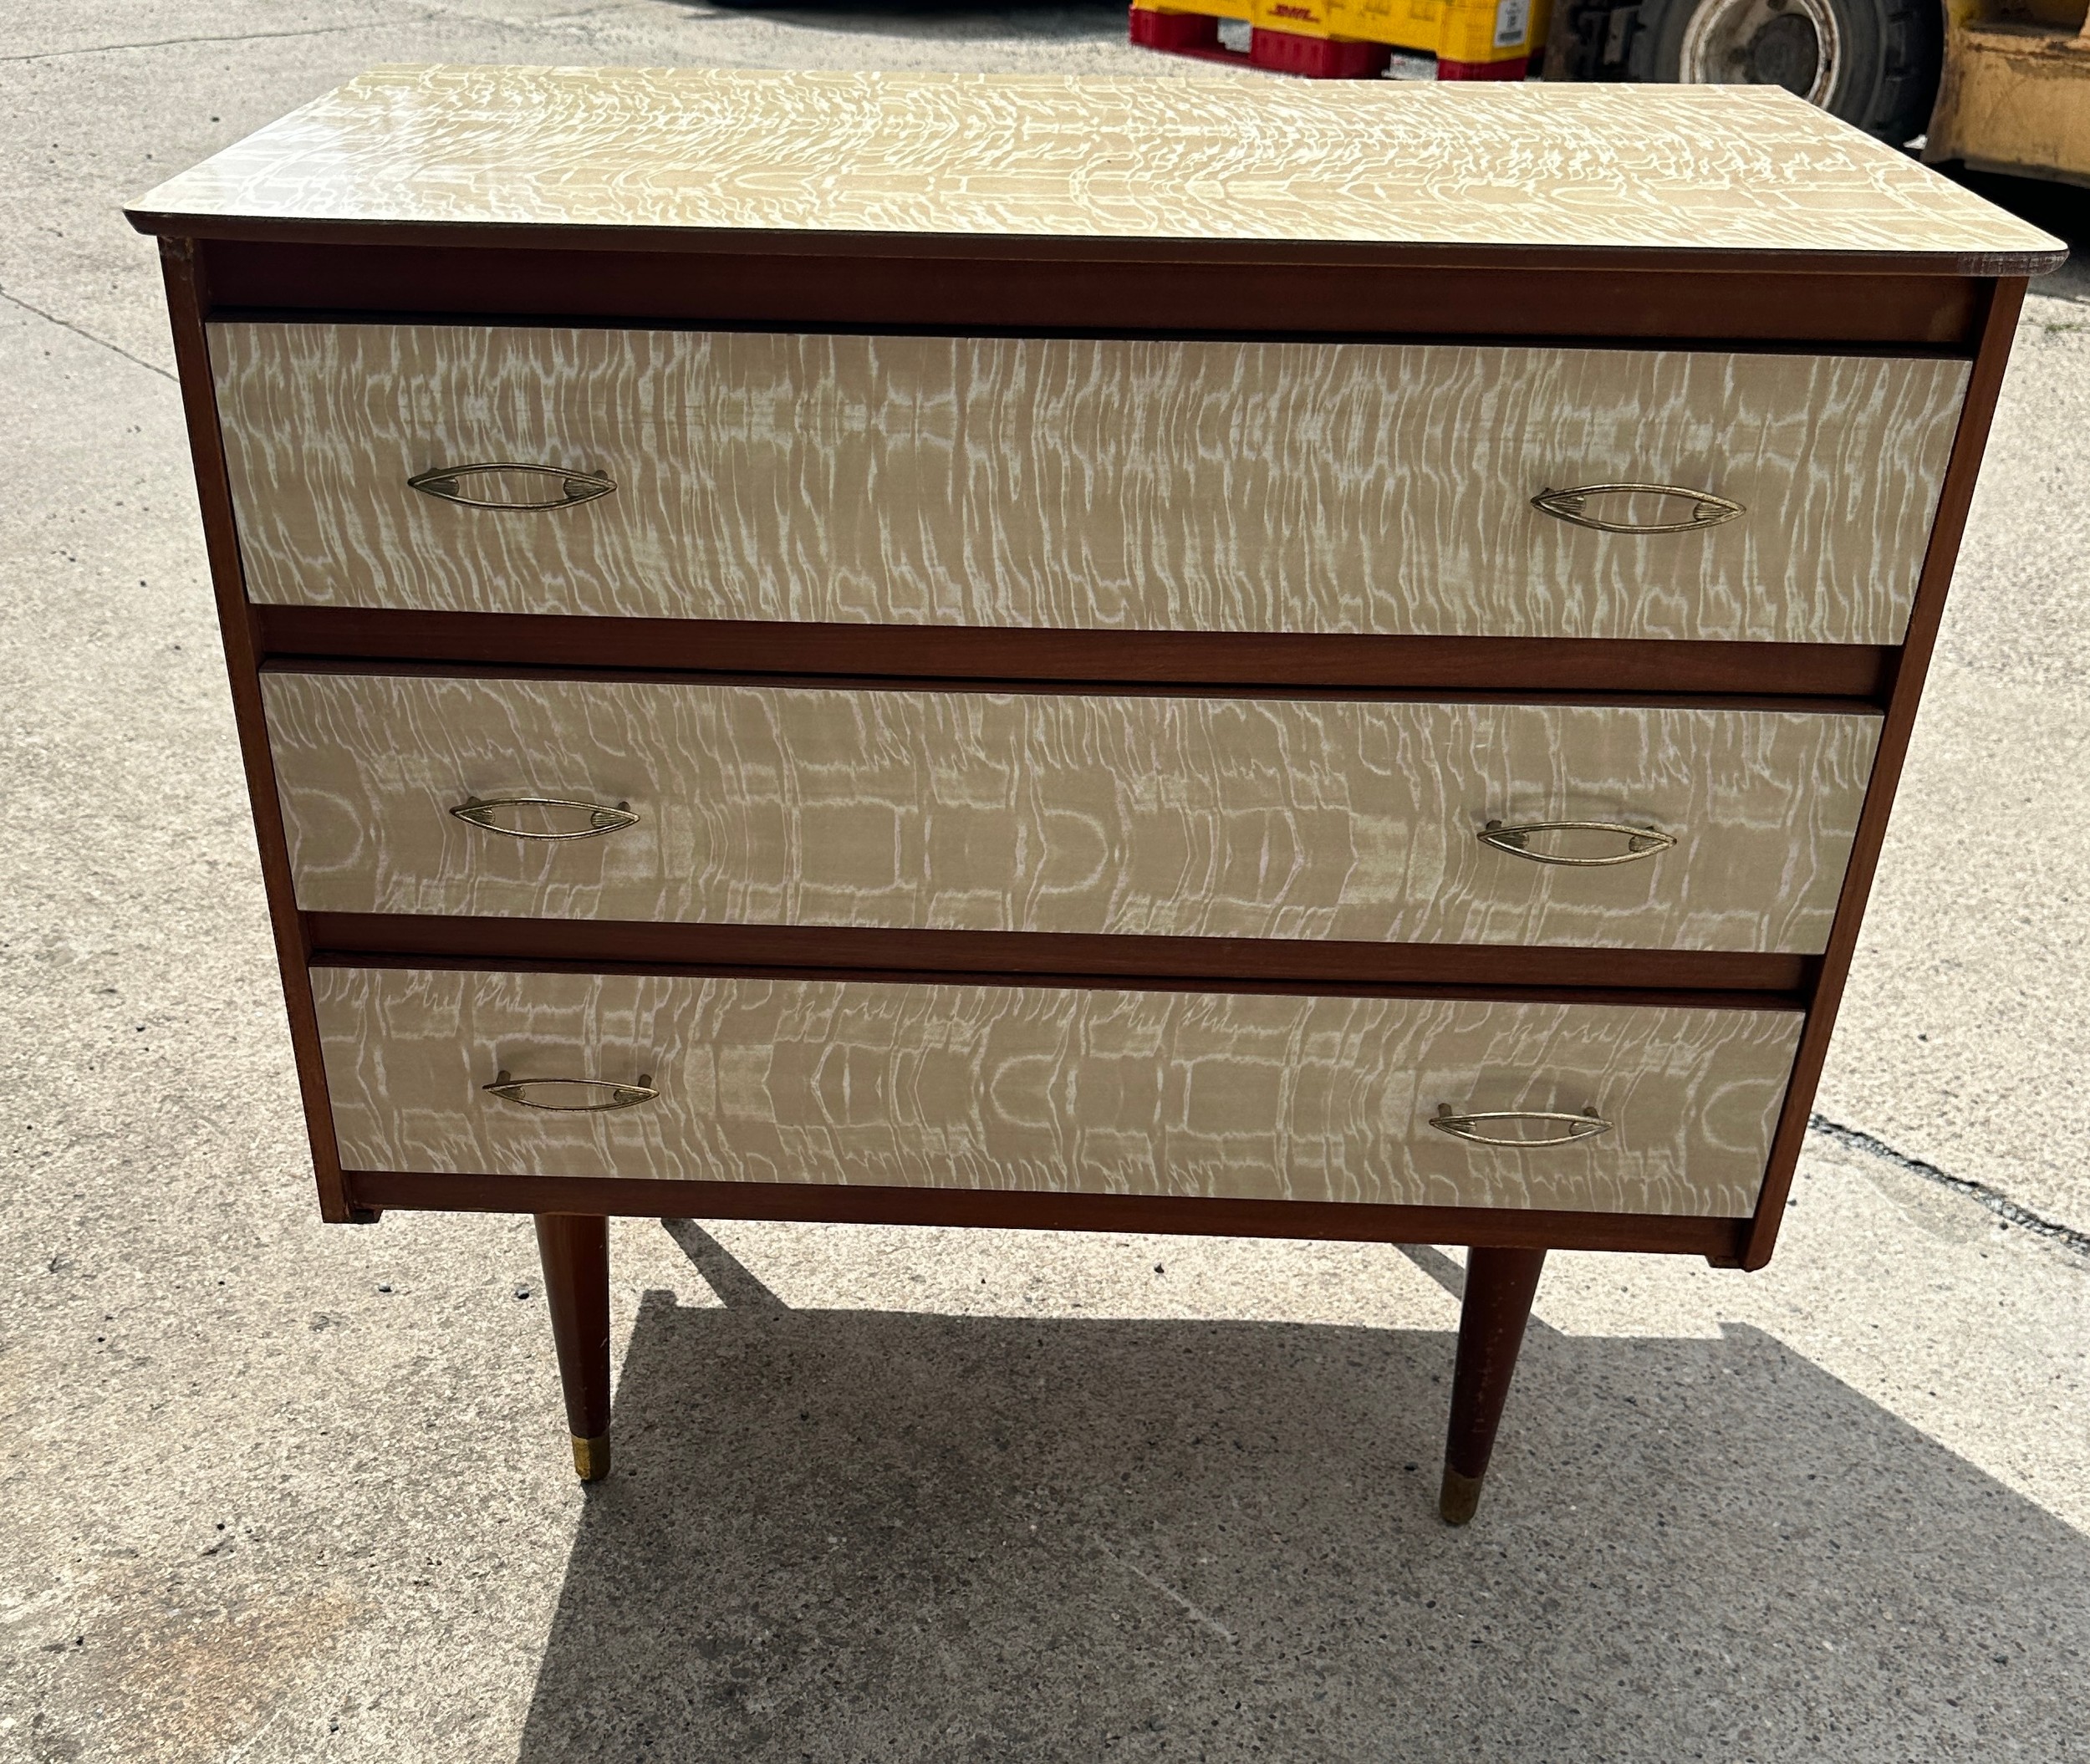 60's melamine three drawer chest of drawers measures approx 30 inches wide by 28 inches tall